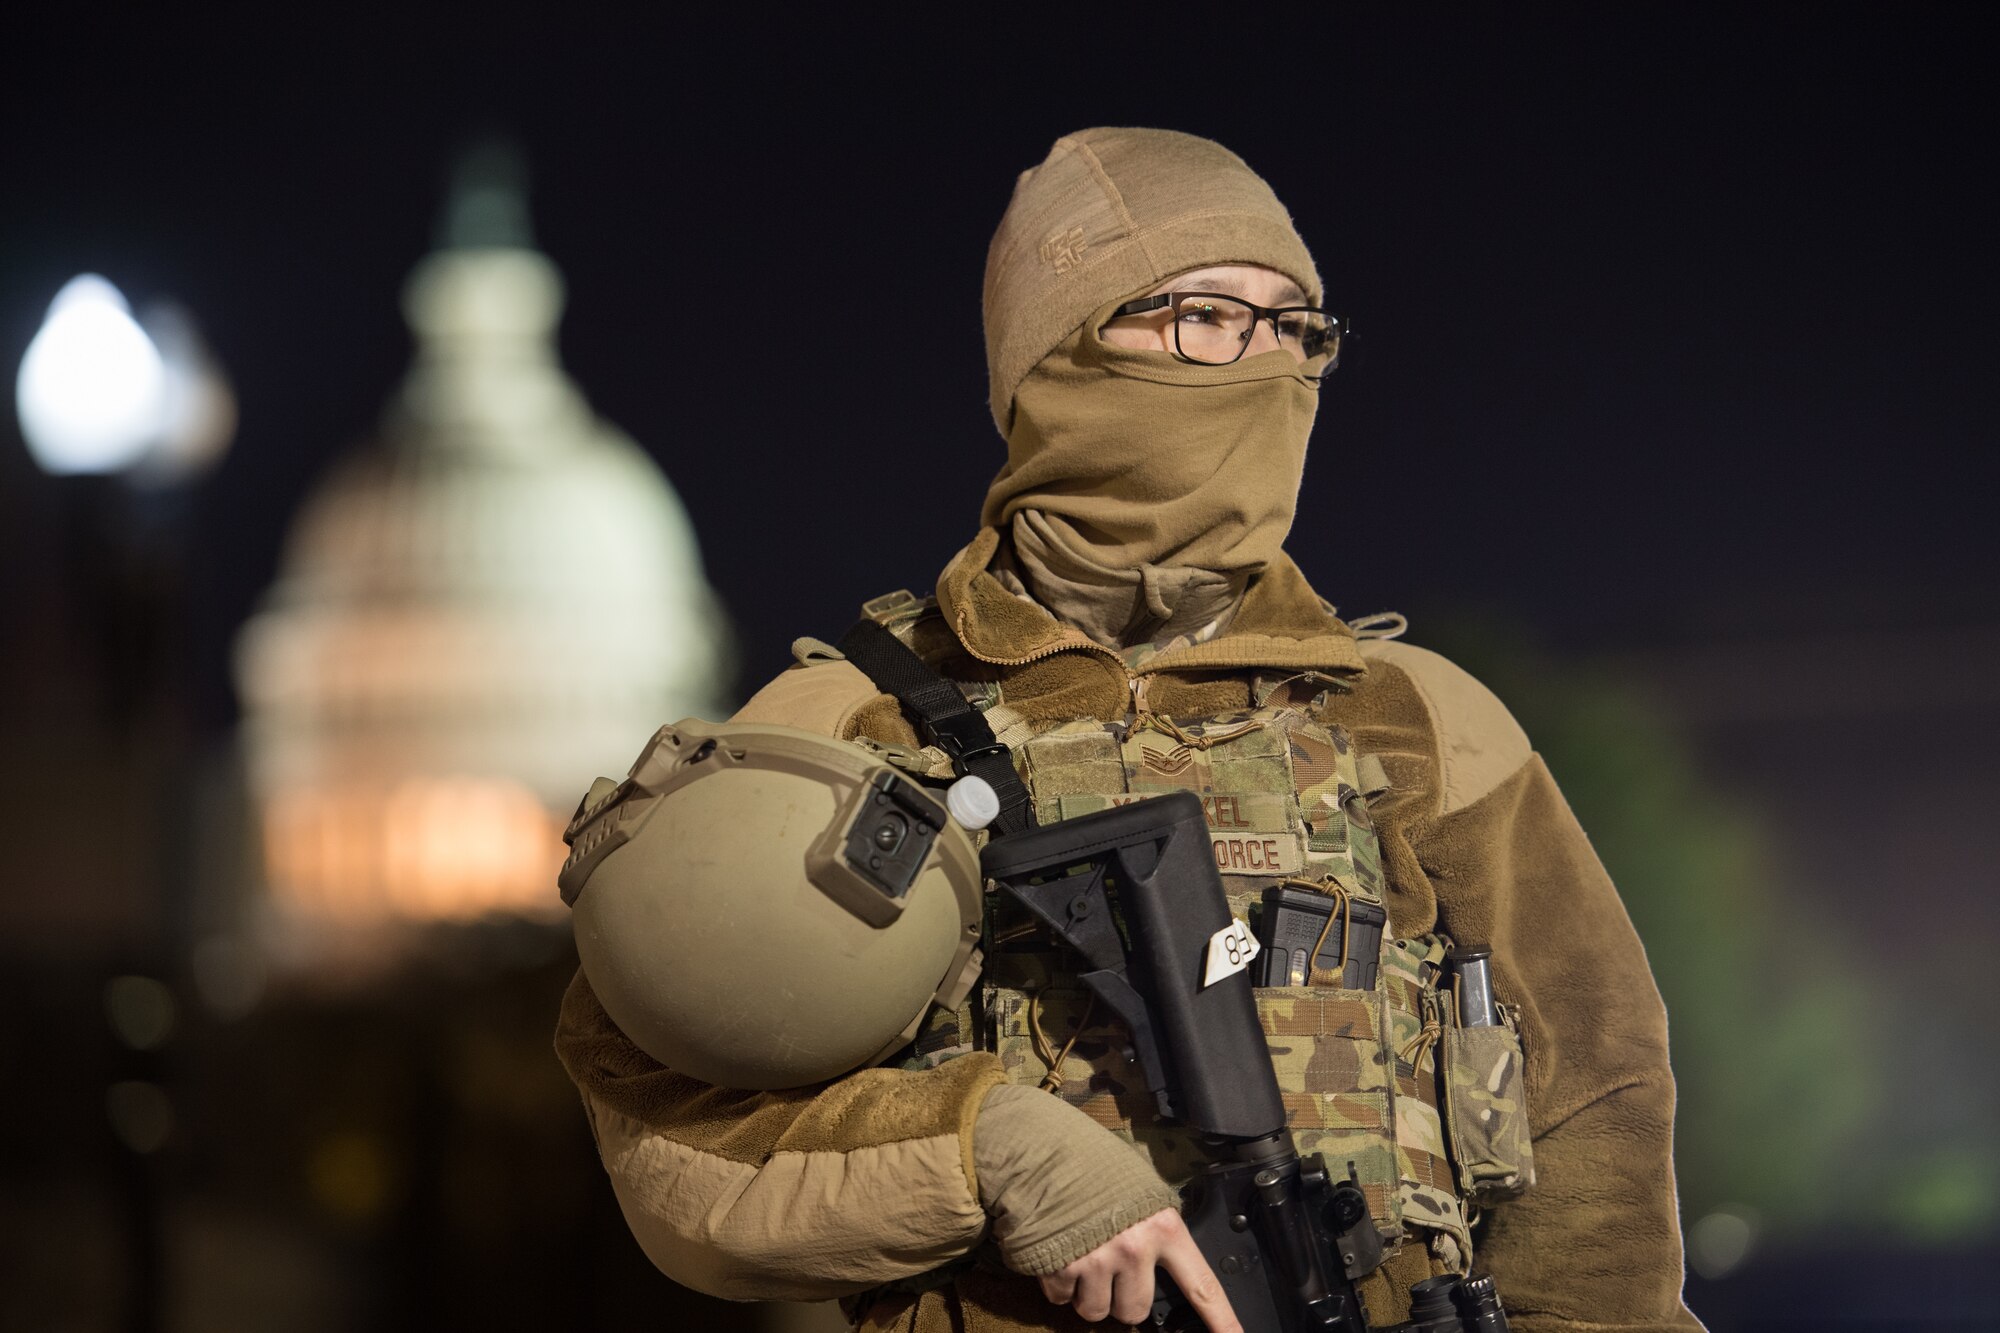 A security forces Airman stands guard at the U.S. Capitol Building in Washington D.C.